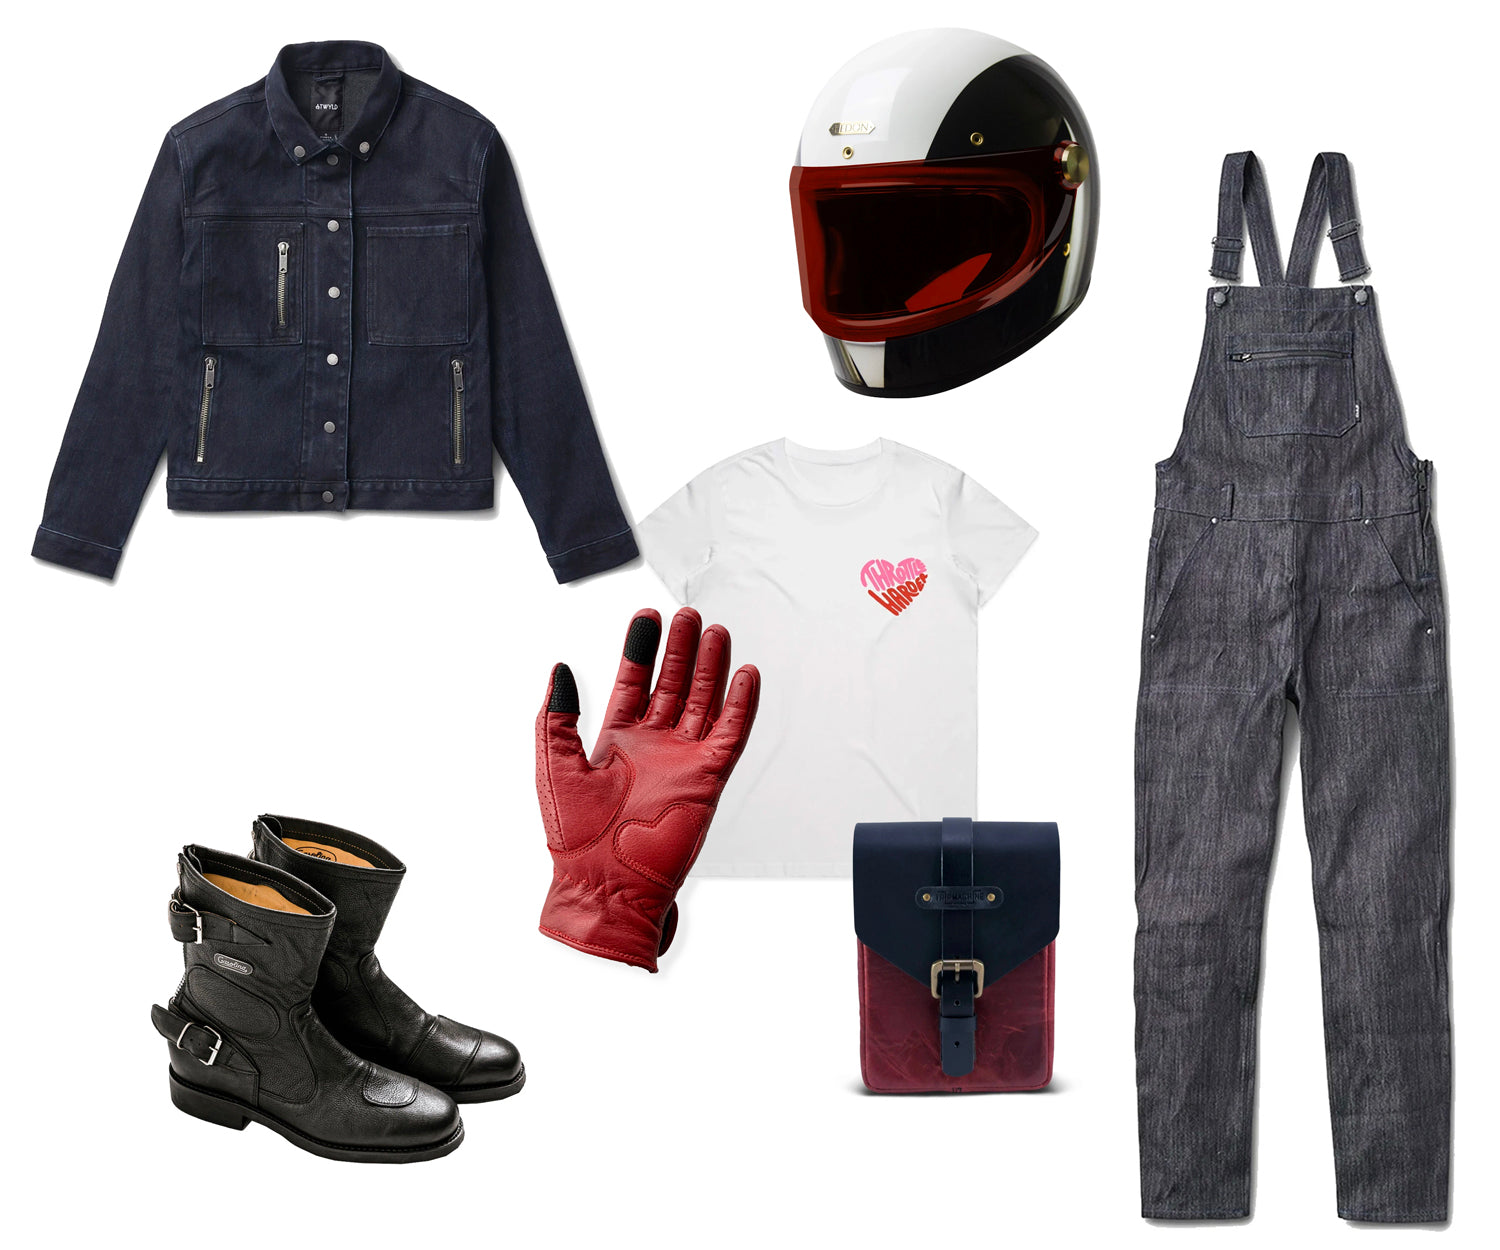 Women's Summer motorcycle outfit